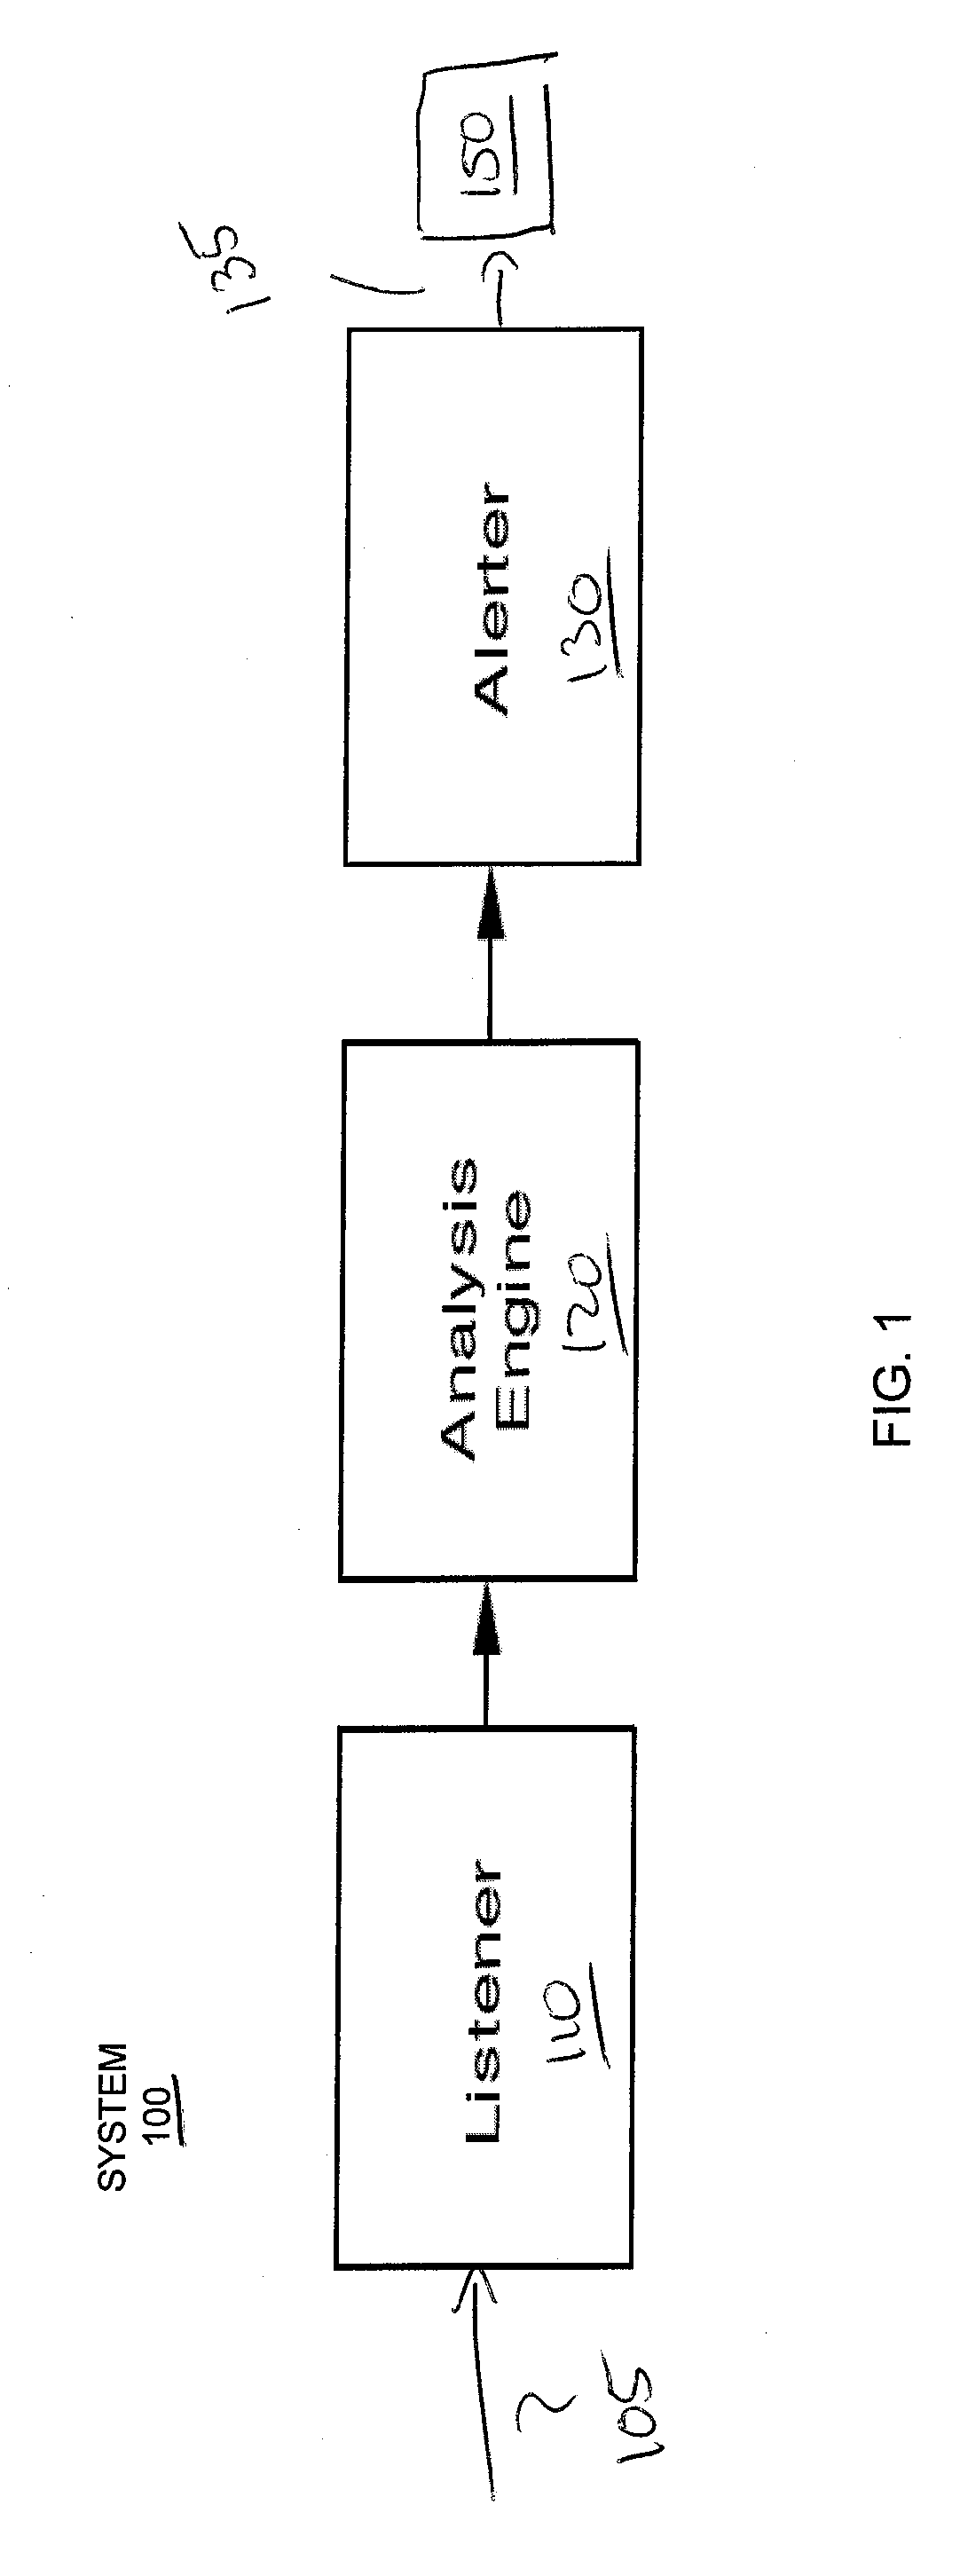 Notification system and methods for use in retail environments